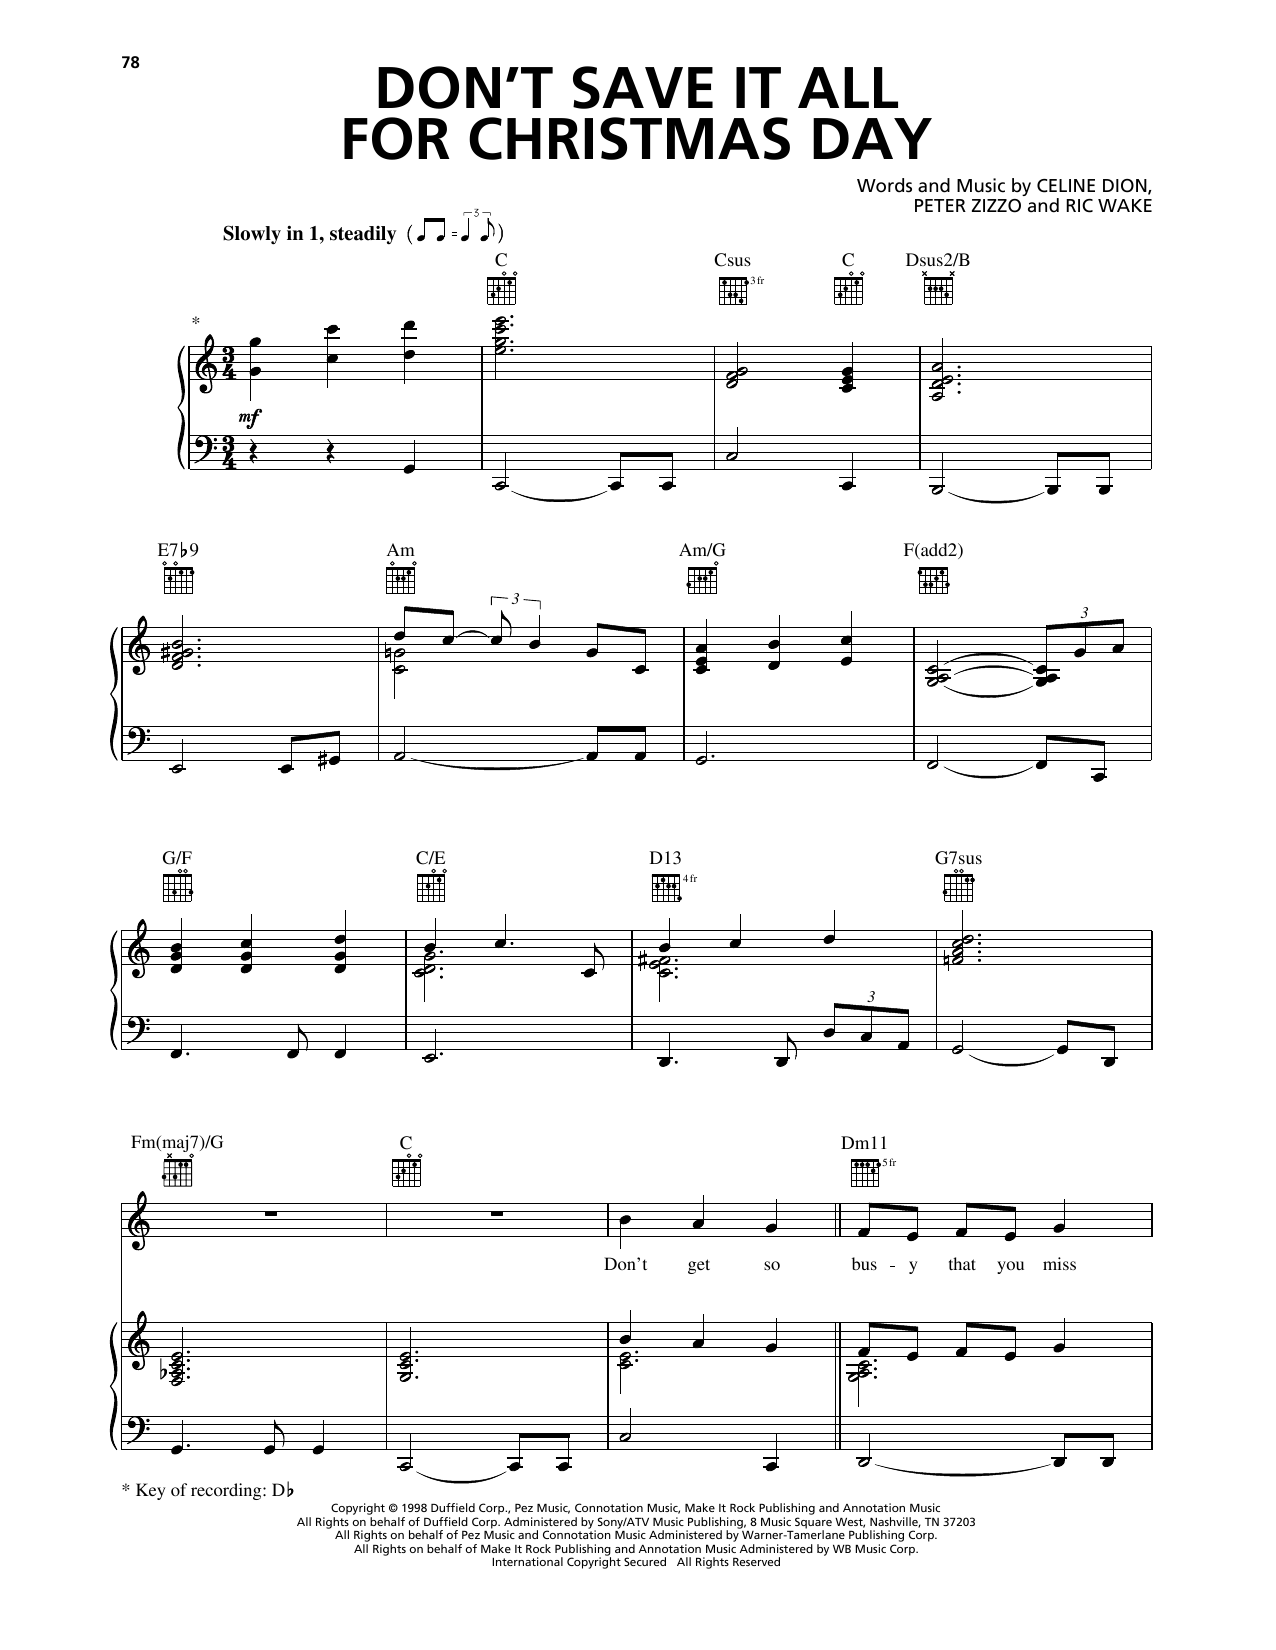 Avalon Don't Save It All For Christmas Day sheet music notes and chords. Download Printable PDF.